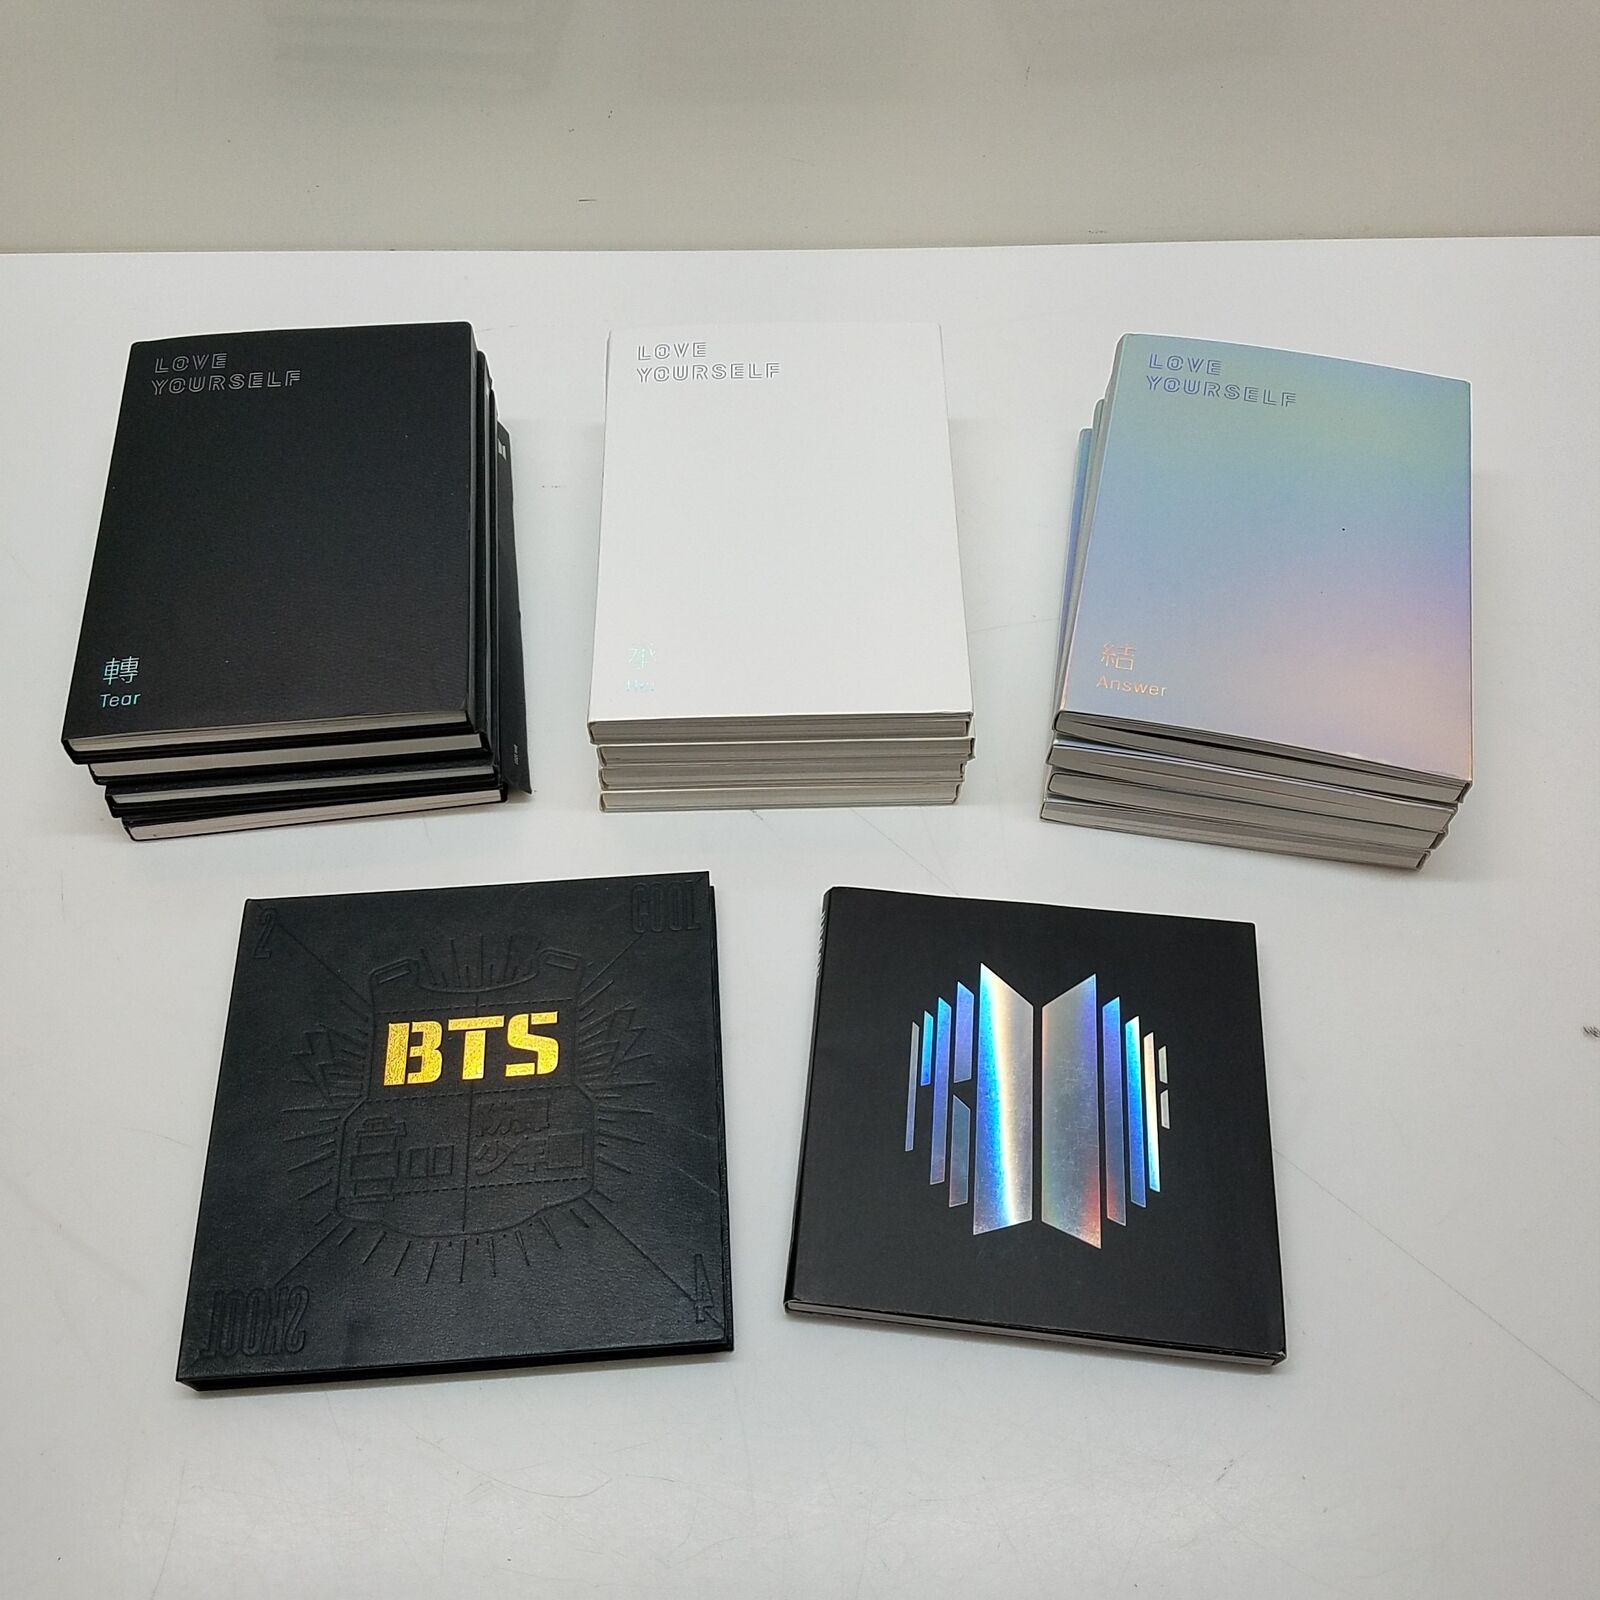 BTS CD Mixed Lot - Love Yourself Complete Set, Proof, 2 Cool 4 Skool